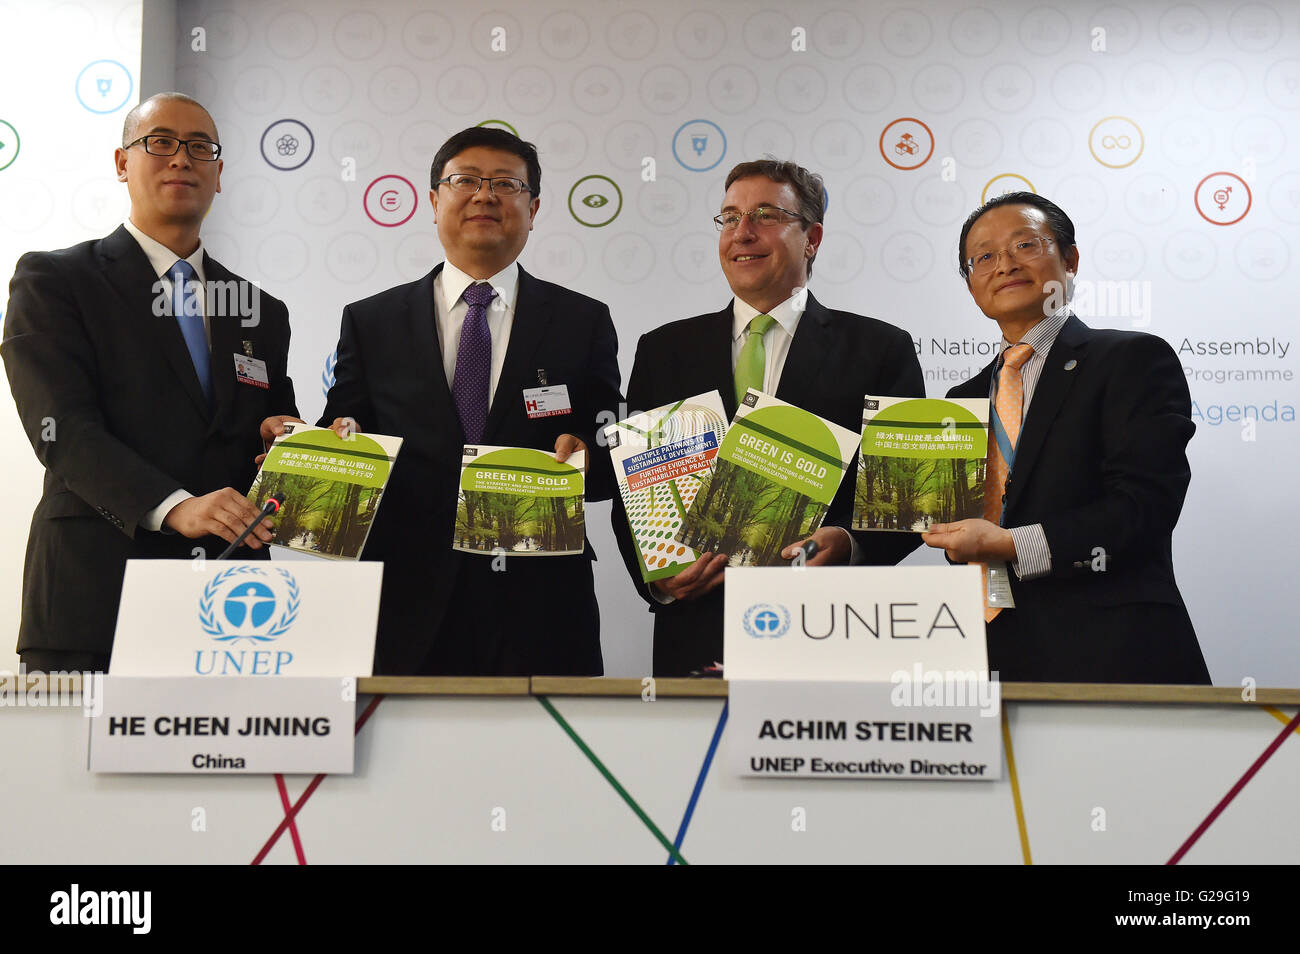 (160526) -- NAIROBI, May 26, 2016(Xinhua) -- UNEP Executive Director Achim Steiner (2nd R), Chinese Minister of Environment Protection Chen Jining (2nd L) together with other representatives hold the report entitled 'Green is gold: The strategy and actions of China's ecological civilization' during a press conference of the second edition of the United Nations Environment Assembly in Nairobi, Kenya, May 26, 2016. An estimated 23 percent of total land mass in China will be covered by forests by 2020 if the Asian giant implements ambitious goals spelt out in its ecological civilization blueprint Stock Photo